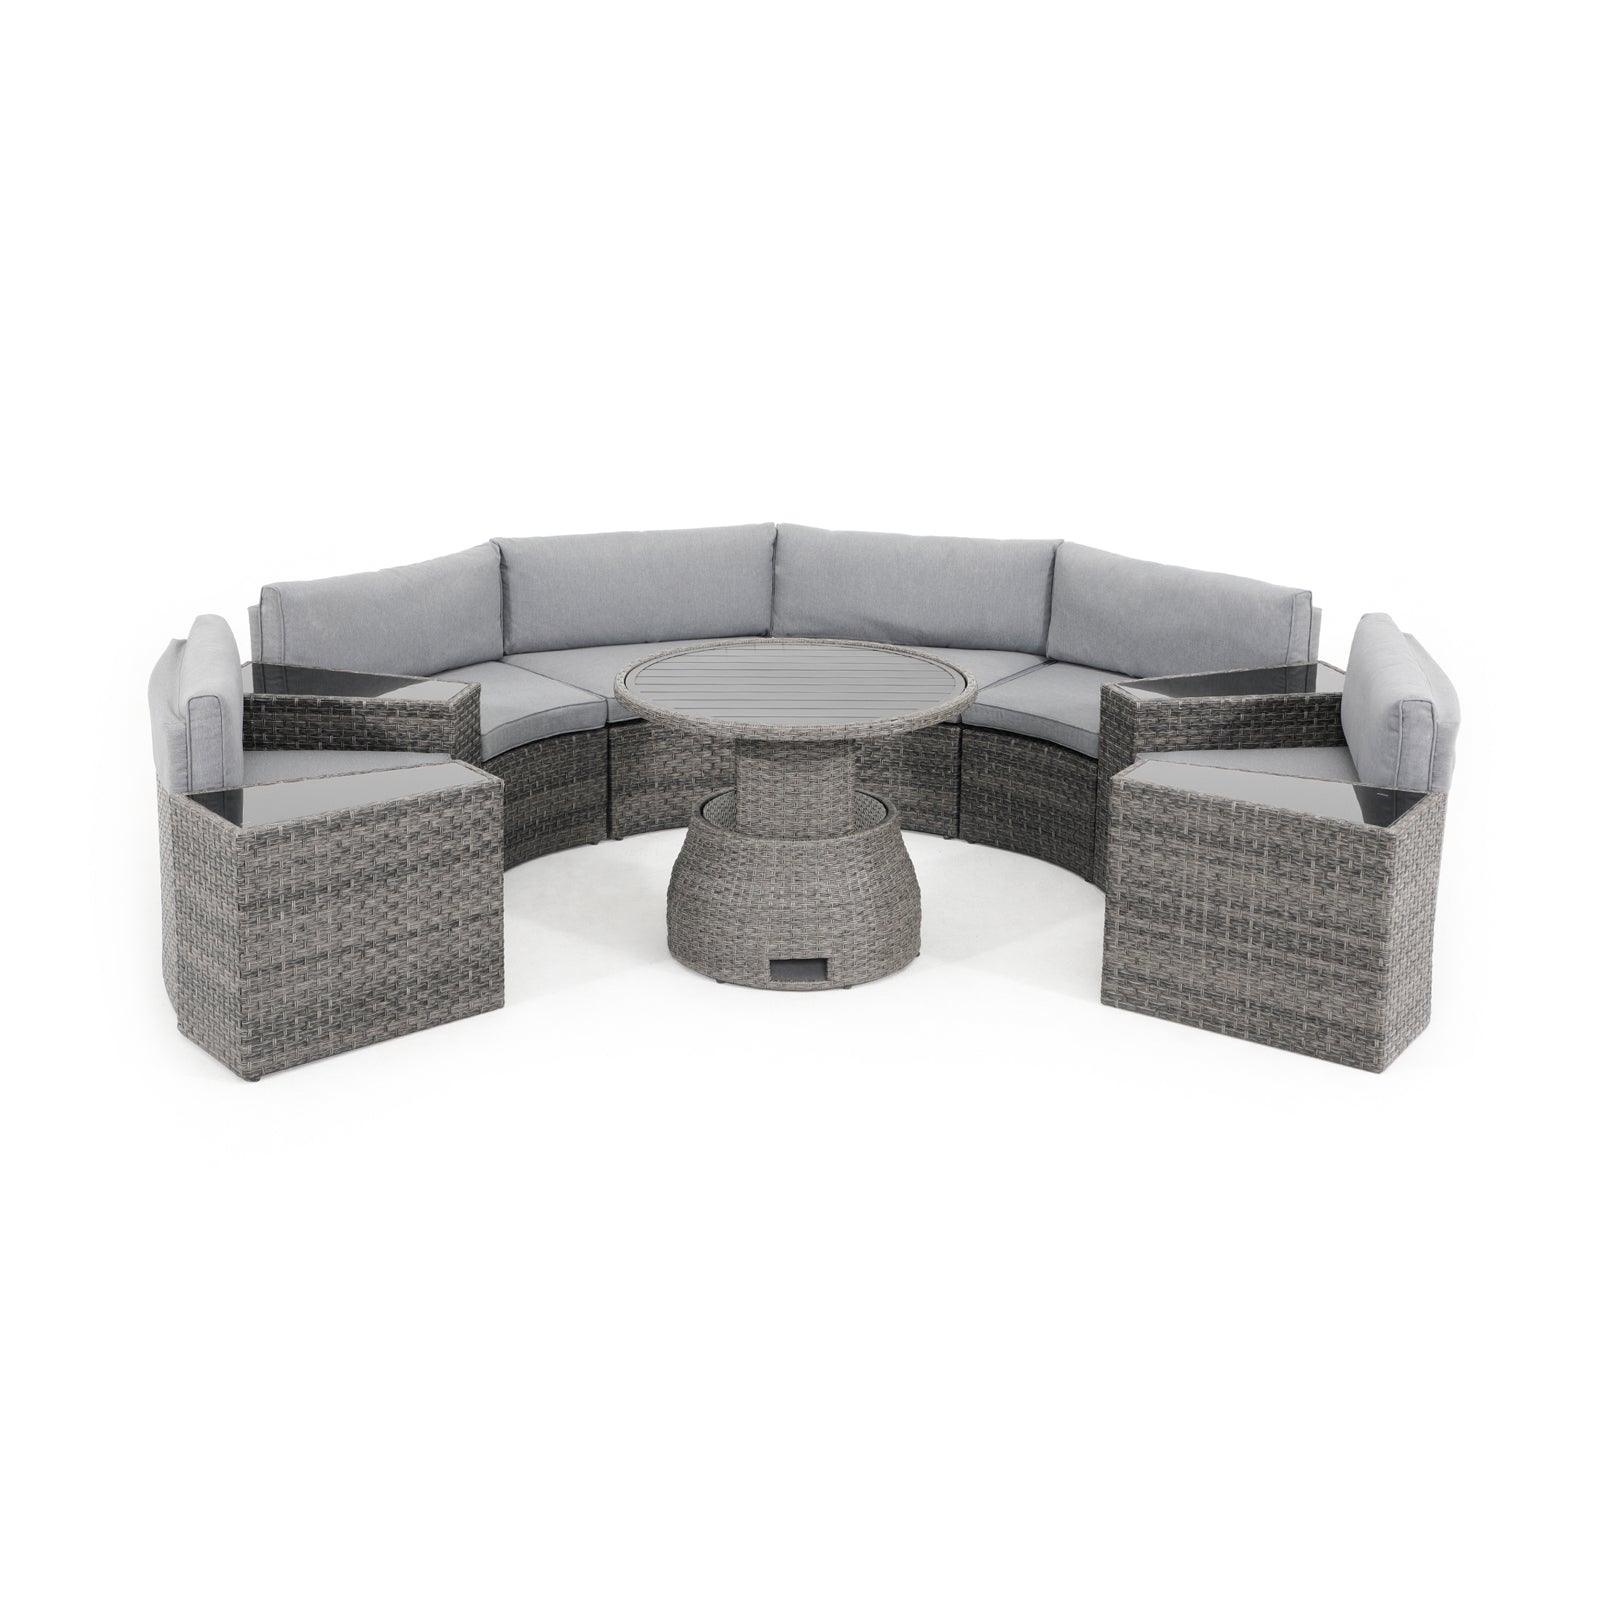 Boboli 6-seater Grey Outdoor Wicker Curved Sectional sofas with grey cushions + 4 wicker side tables + 1 Lift-top round table, front view - Jardina Furniture#color_Grey